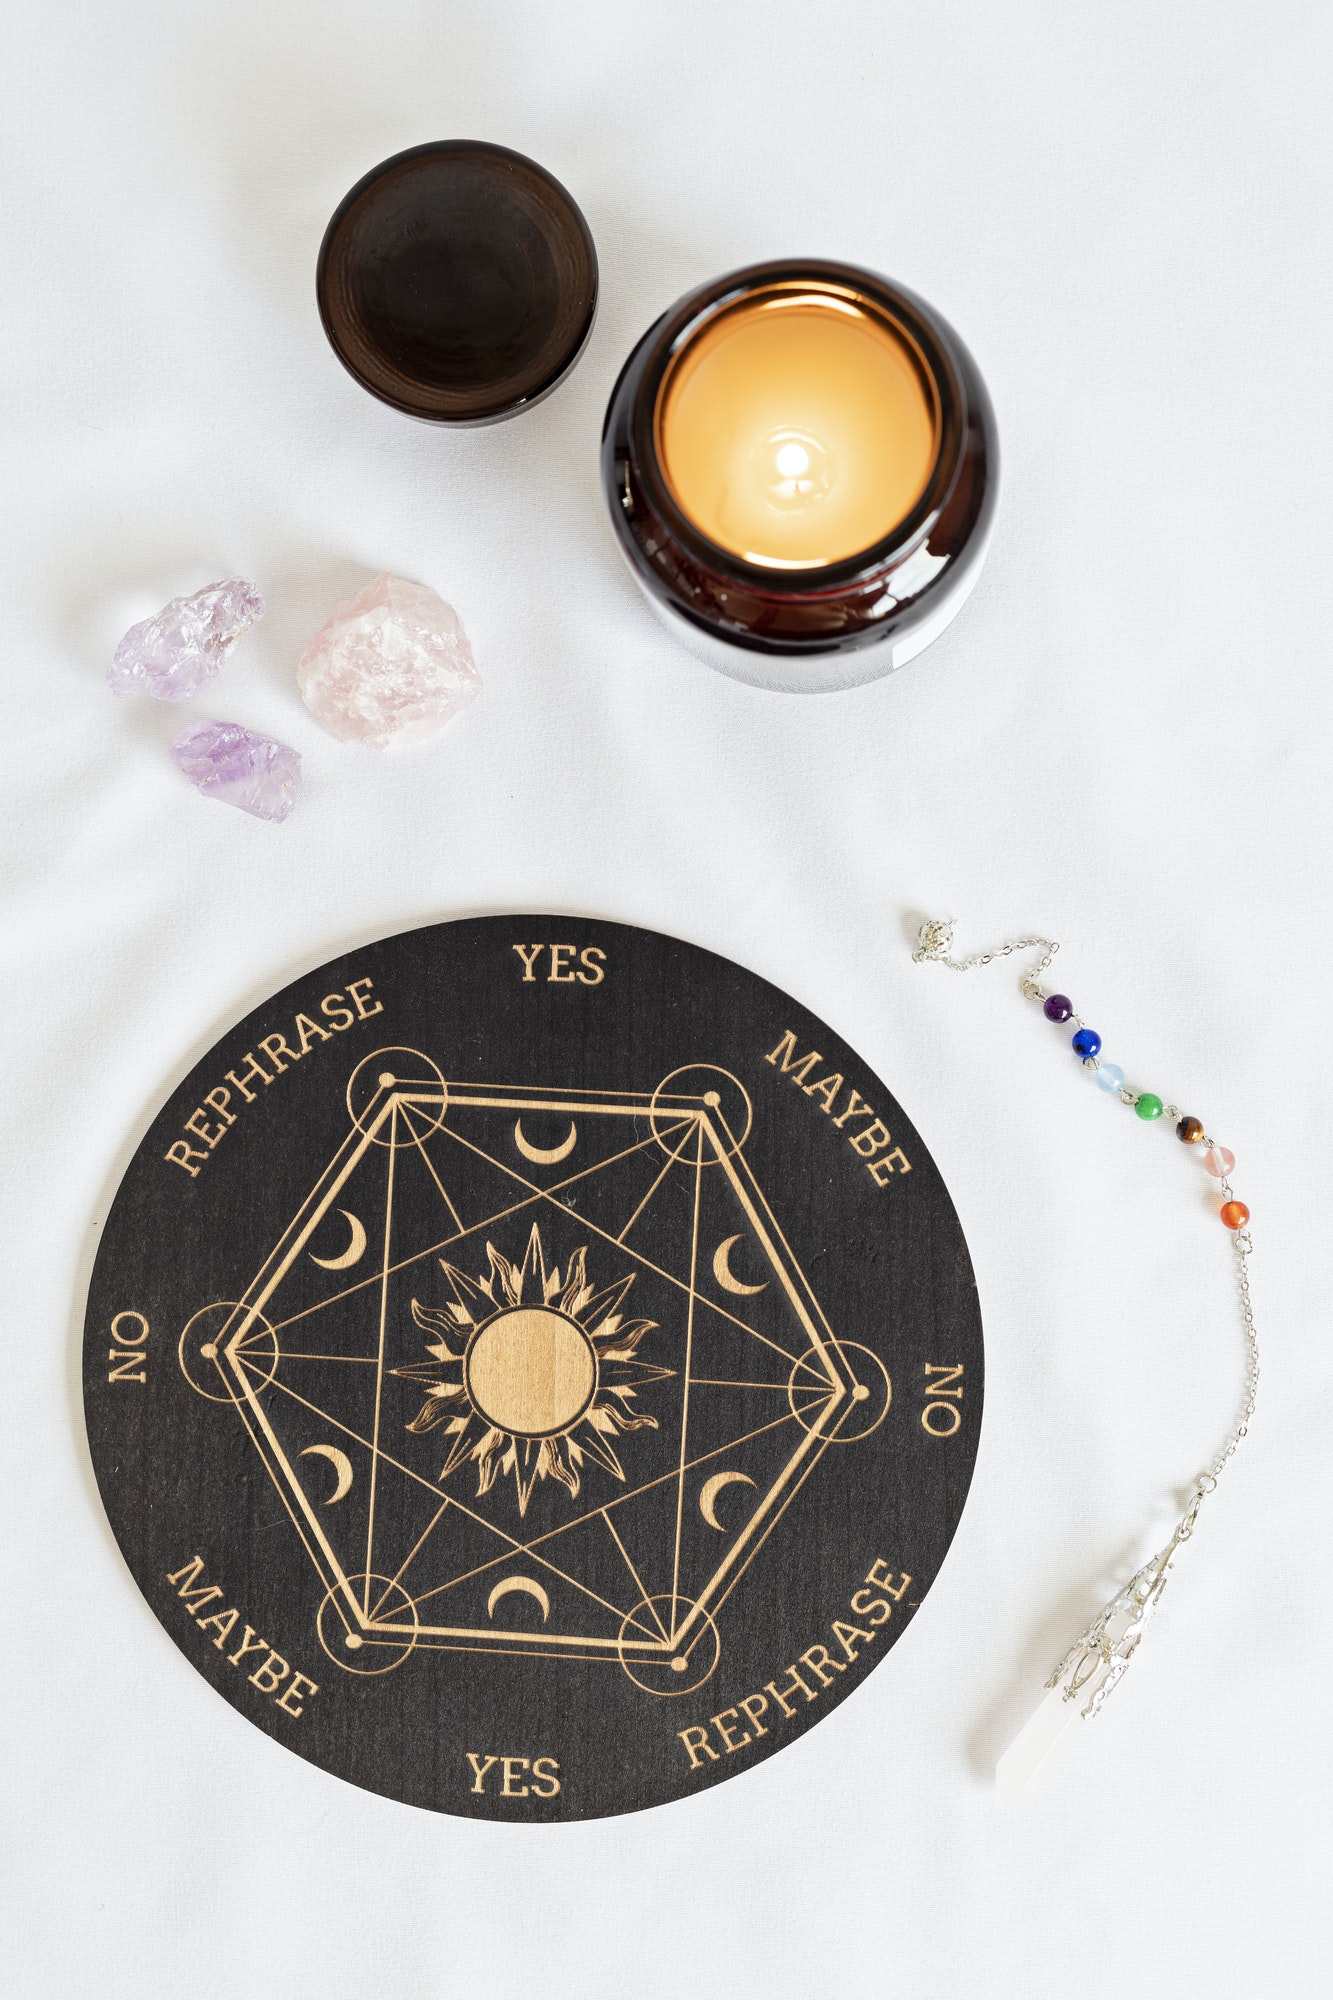 Pendulum board for divination, fortune telling or communicating with spirits